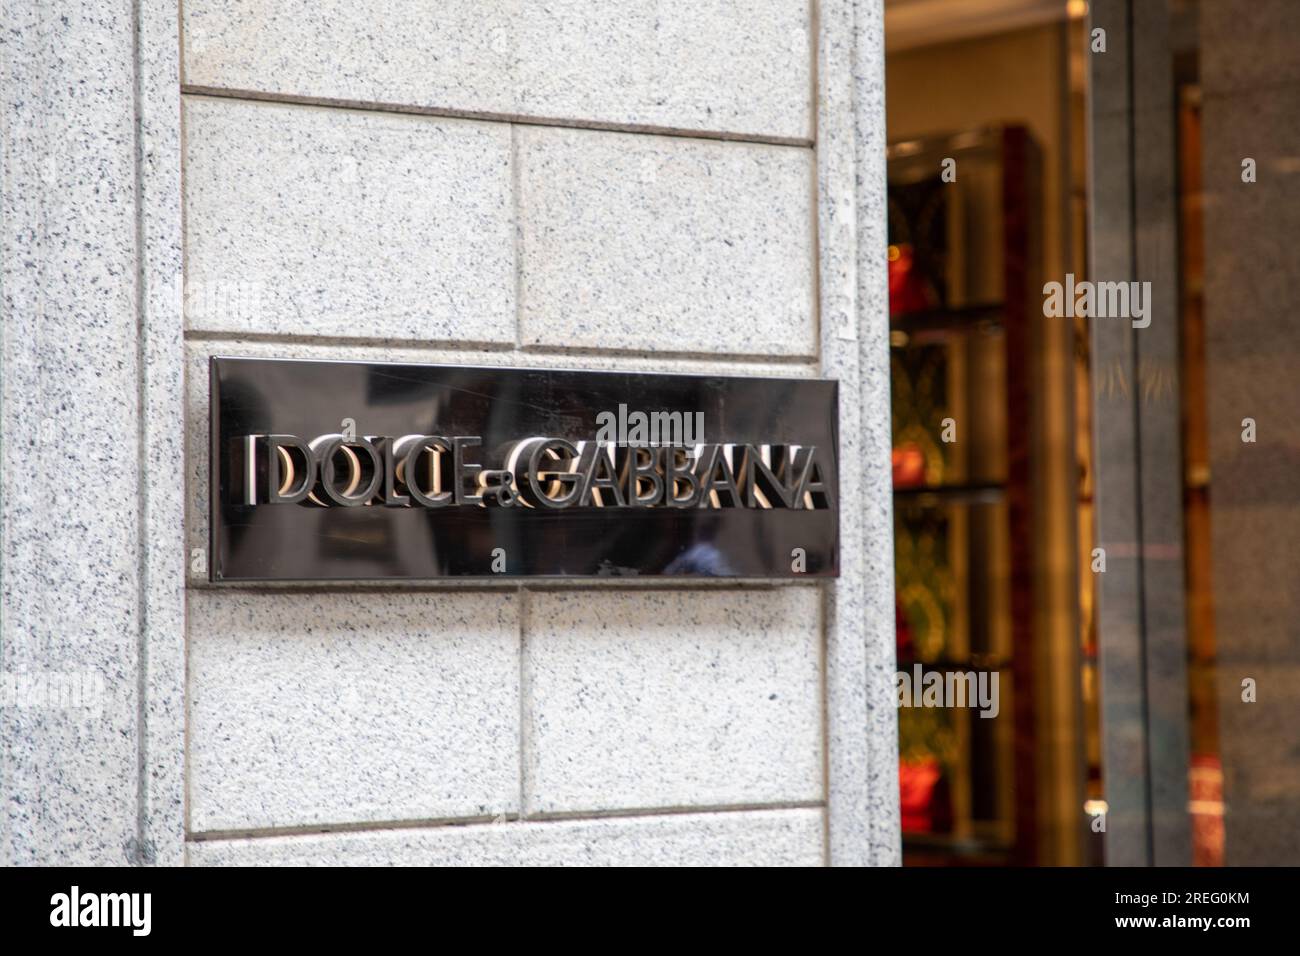 Milan , Italy  - 07 05 2023 : Dolce & Gabbana shop logo brand and text sign entrance facade of Italian luxury industry store fashion house Stock Photo